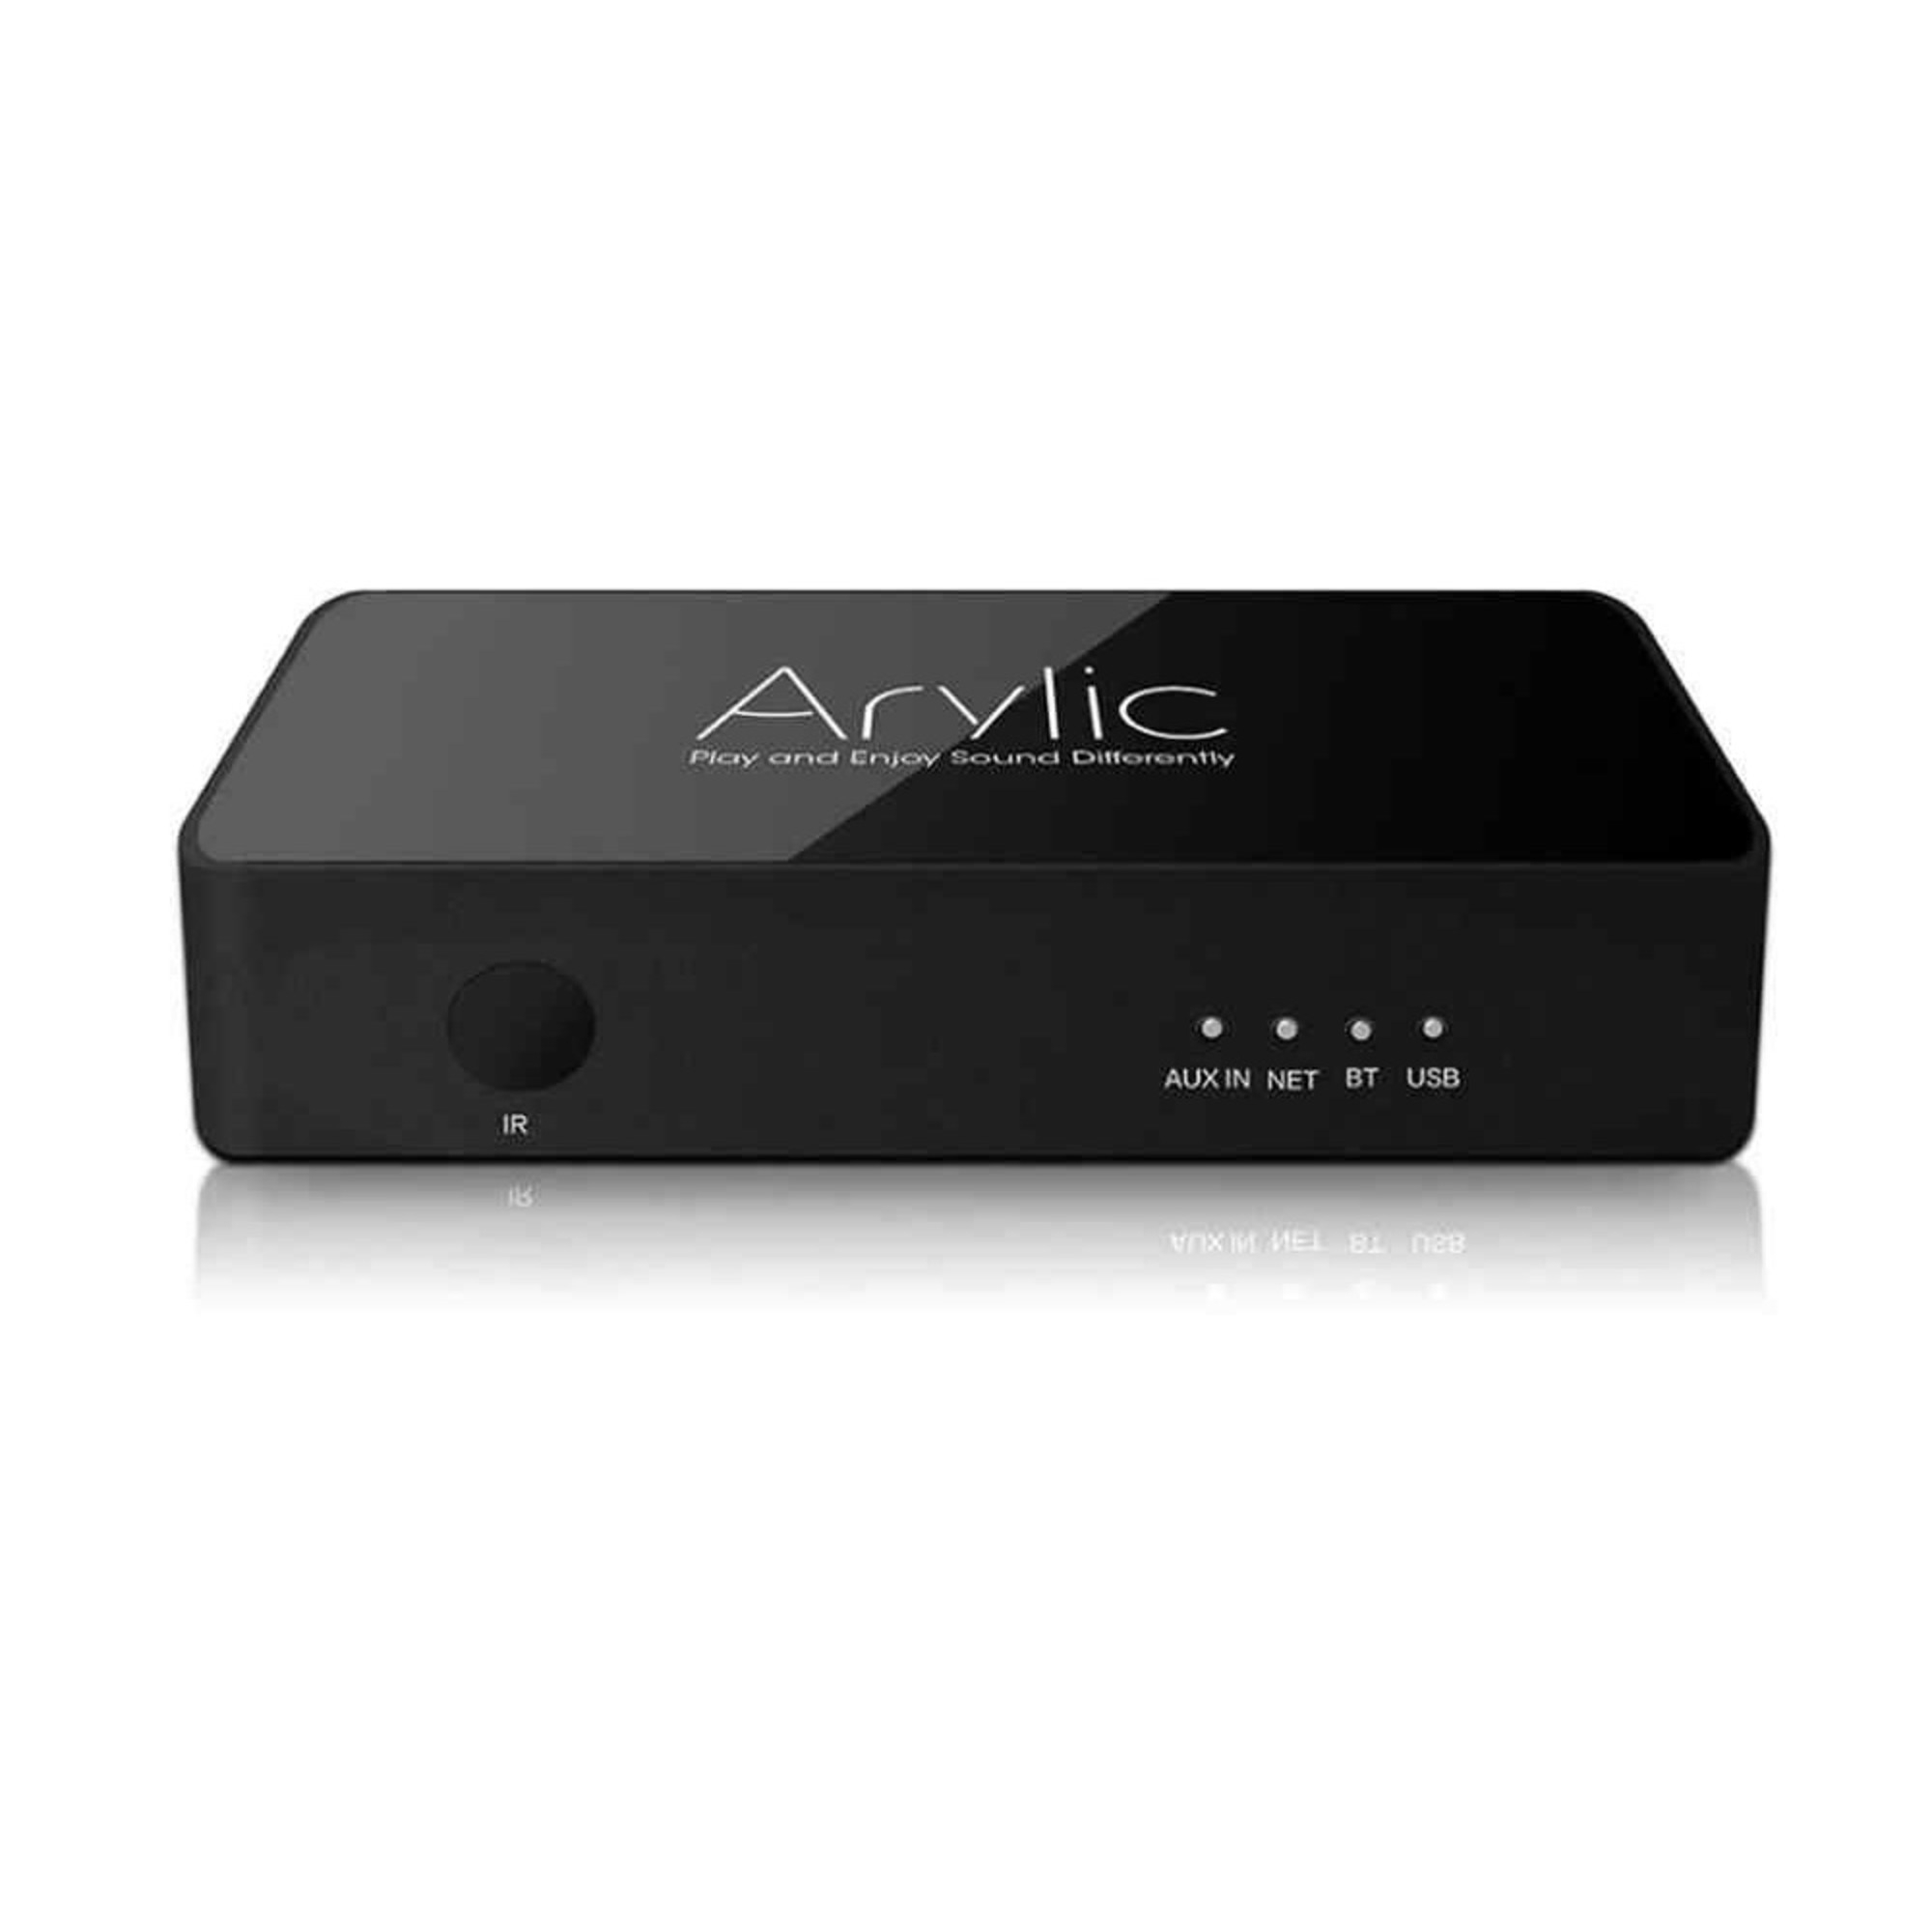 ARYLIC S10 Kablosuz Airplay – Spotify Connect Streamer